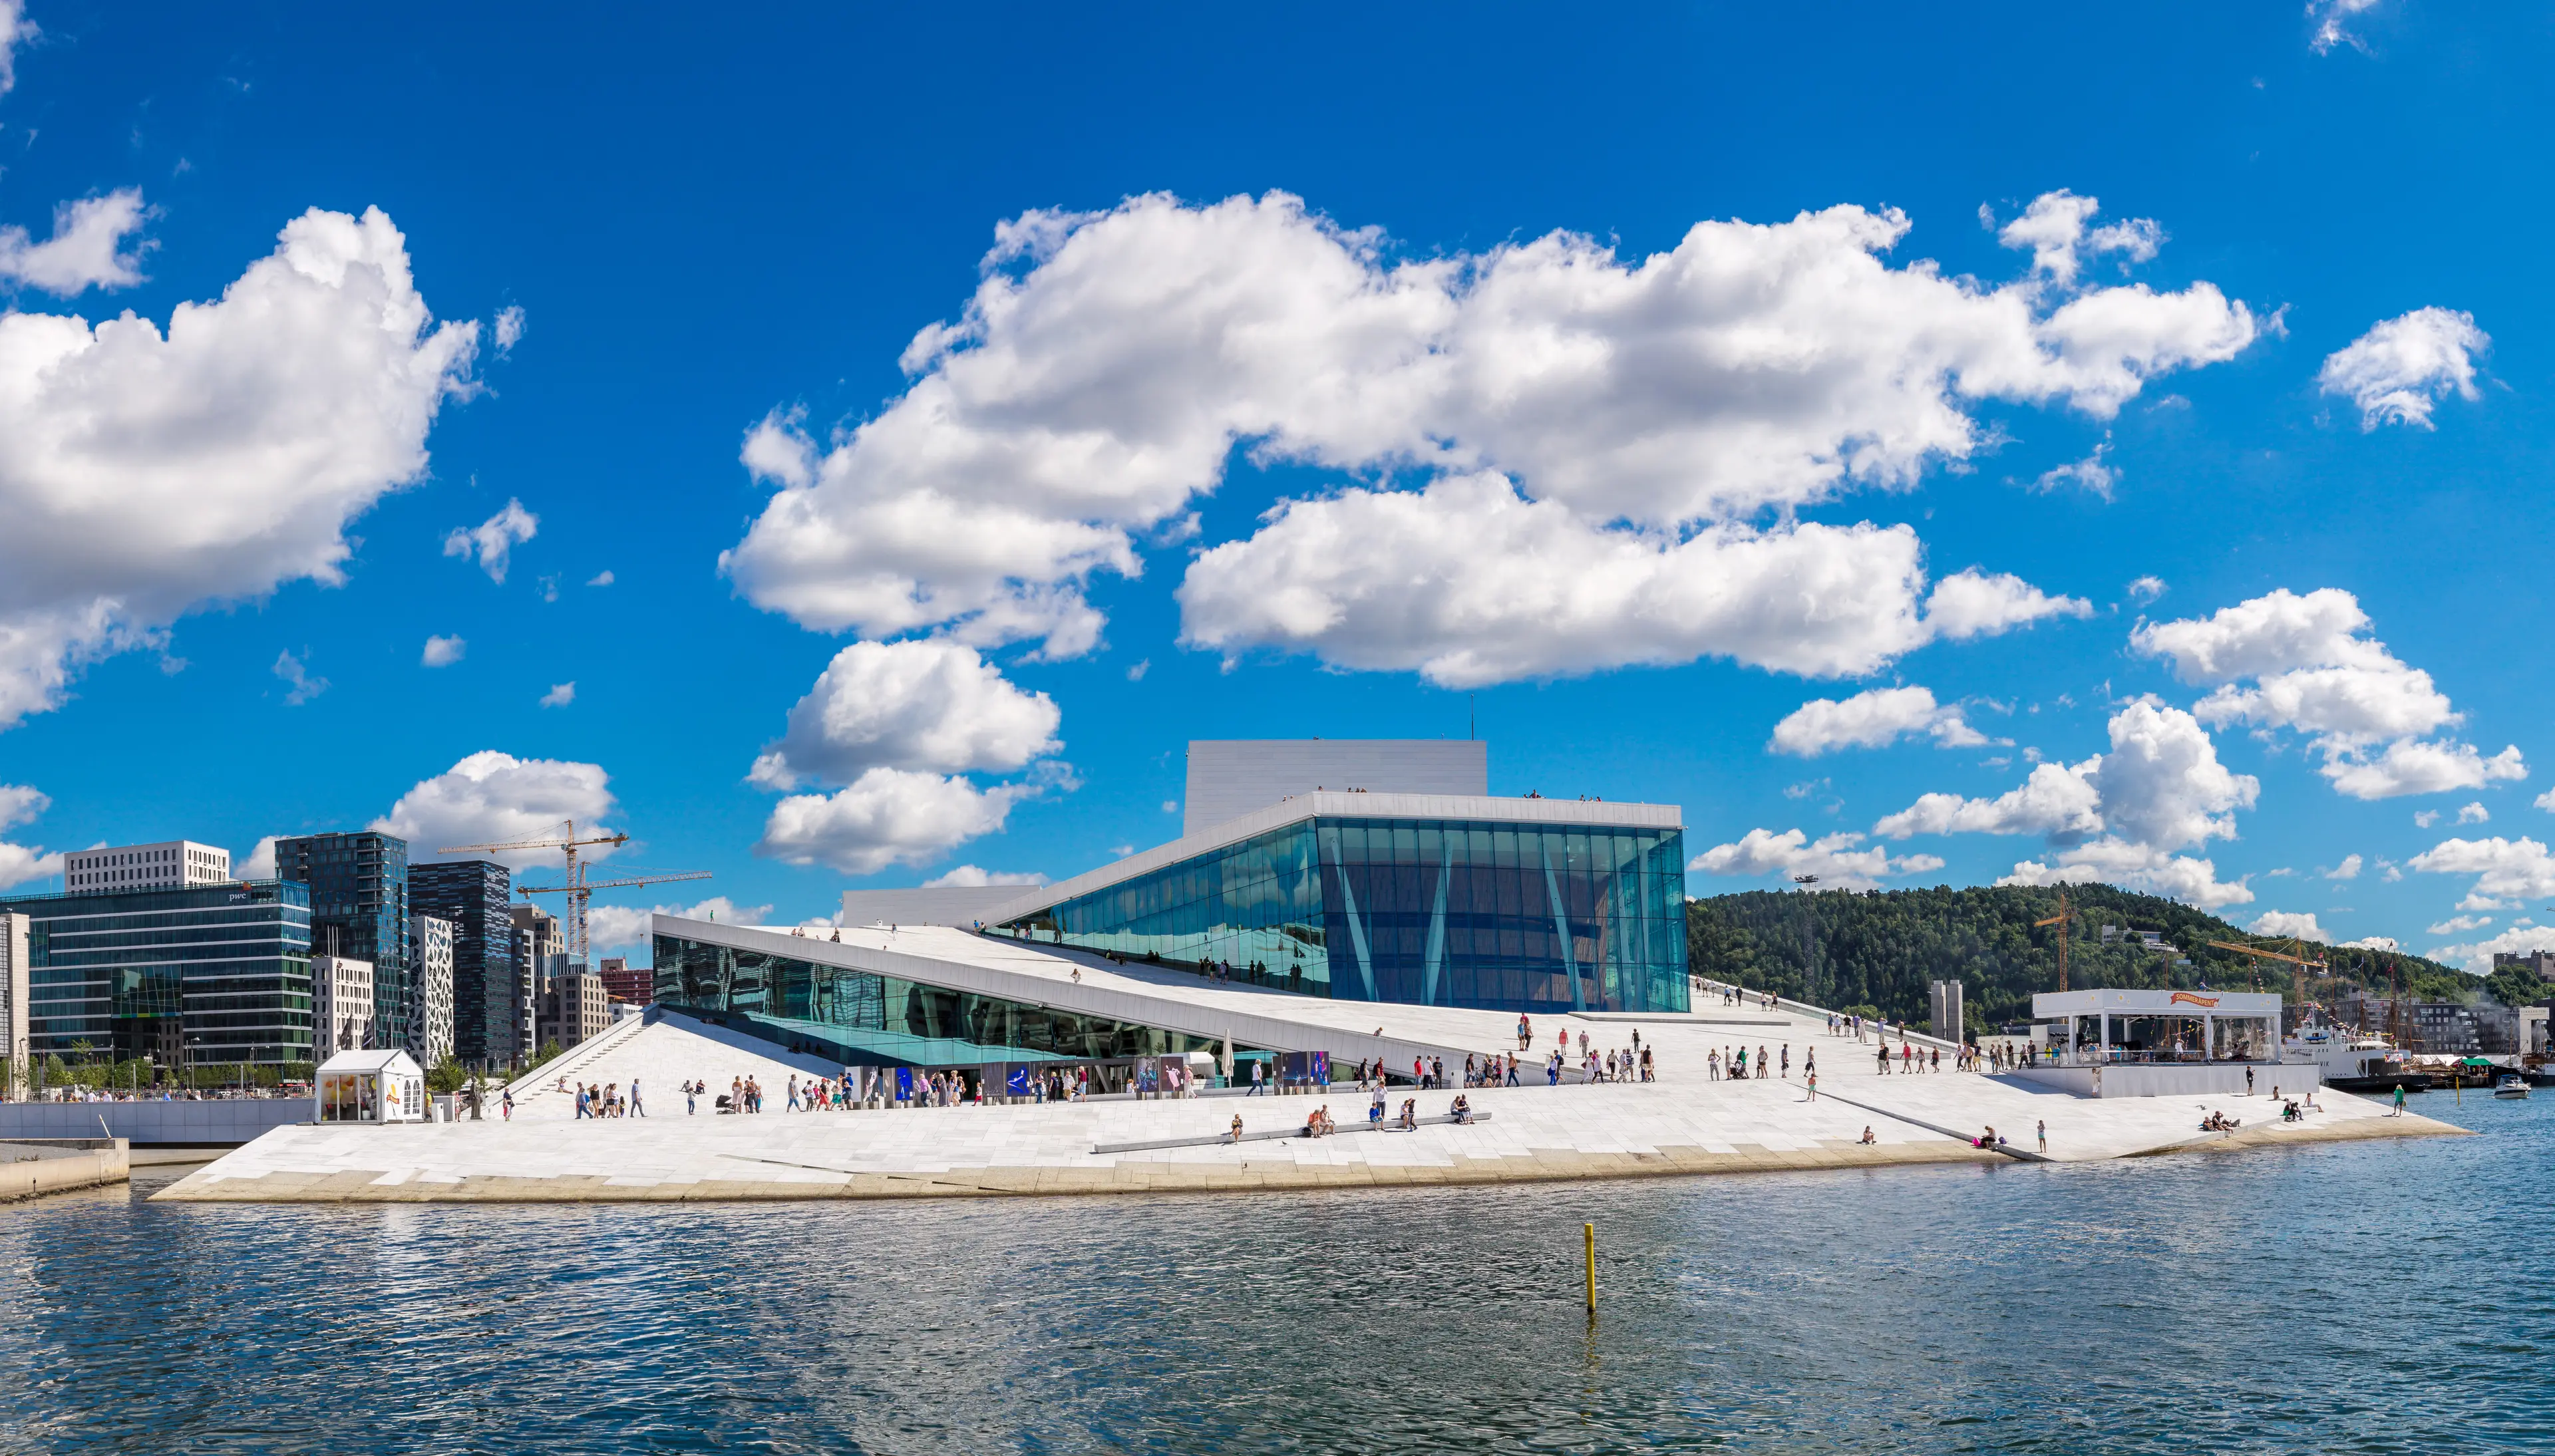 1-Day Oslo Adventure: Outdoor Thrills & Vibrant Nightlife with Friends